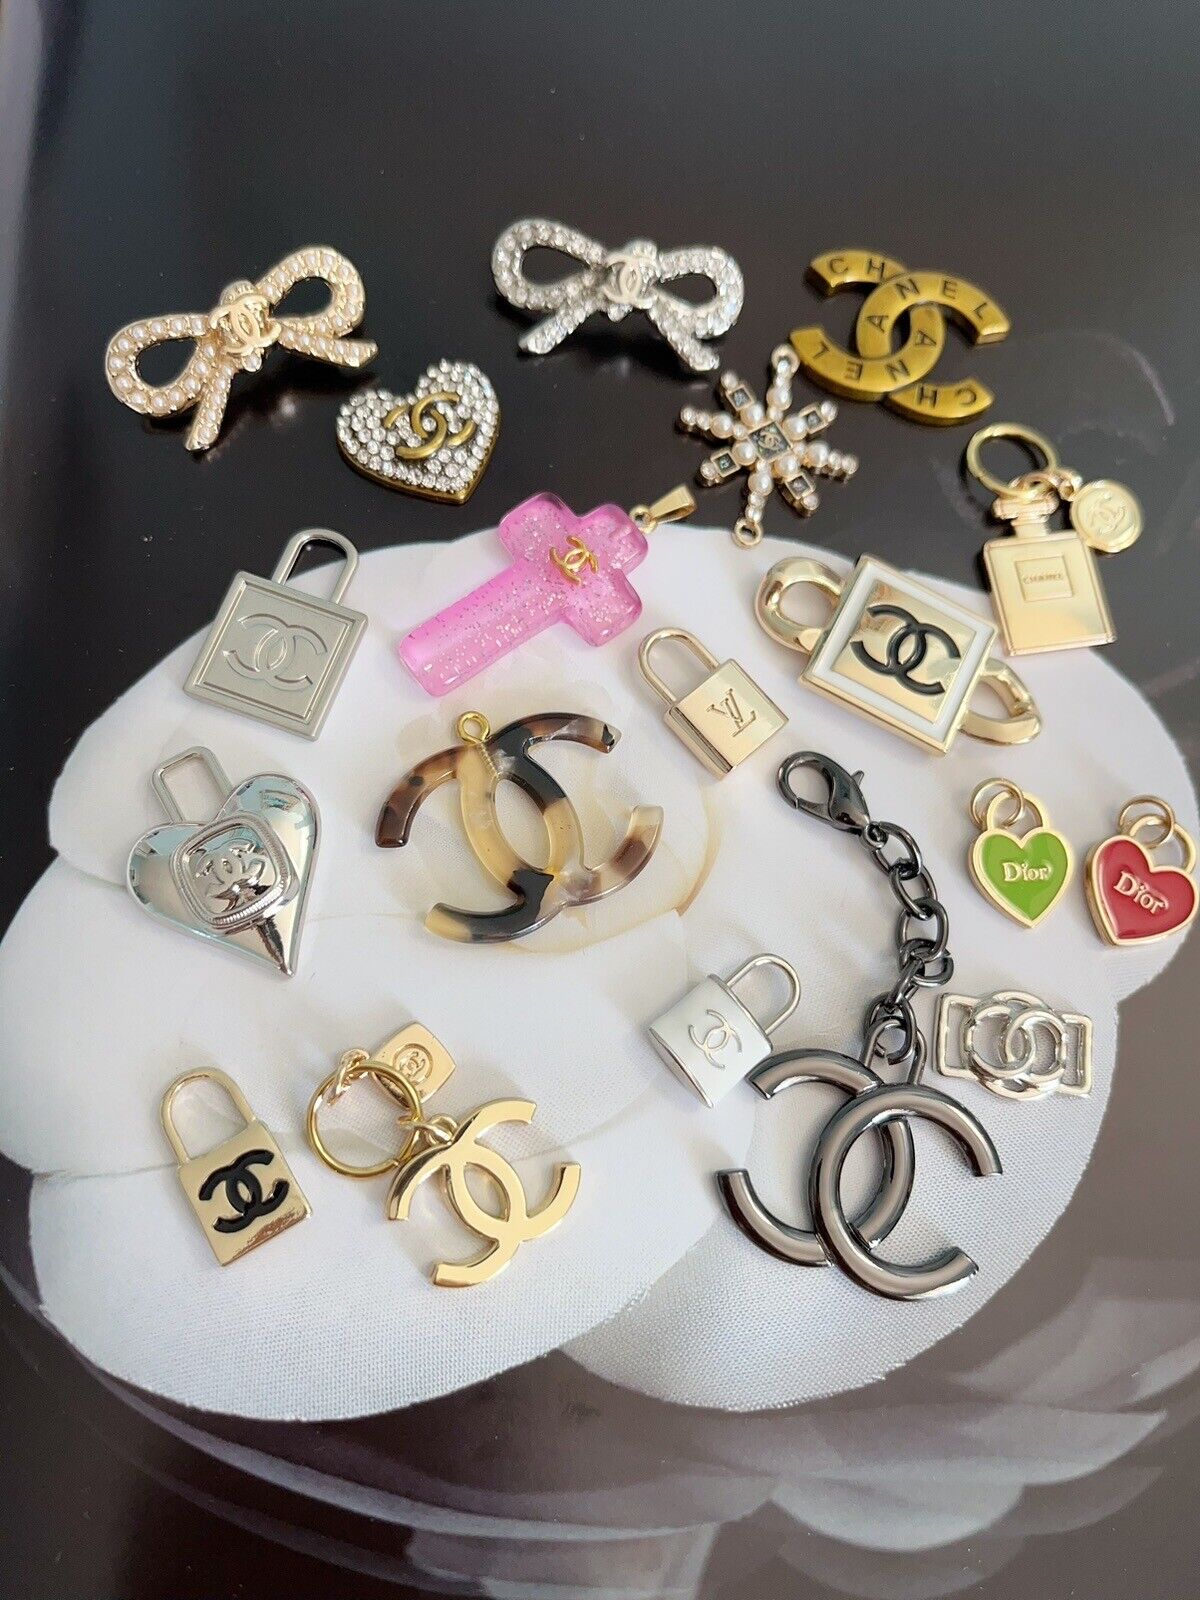 Lot of 19 Chanel buttons and zipper Pulls